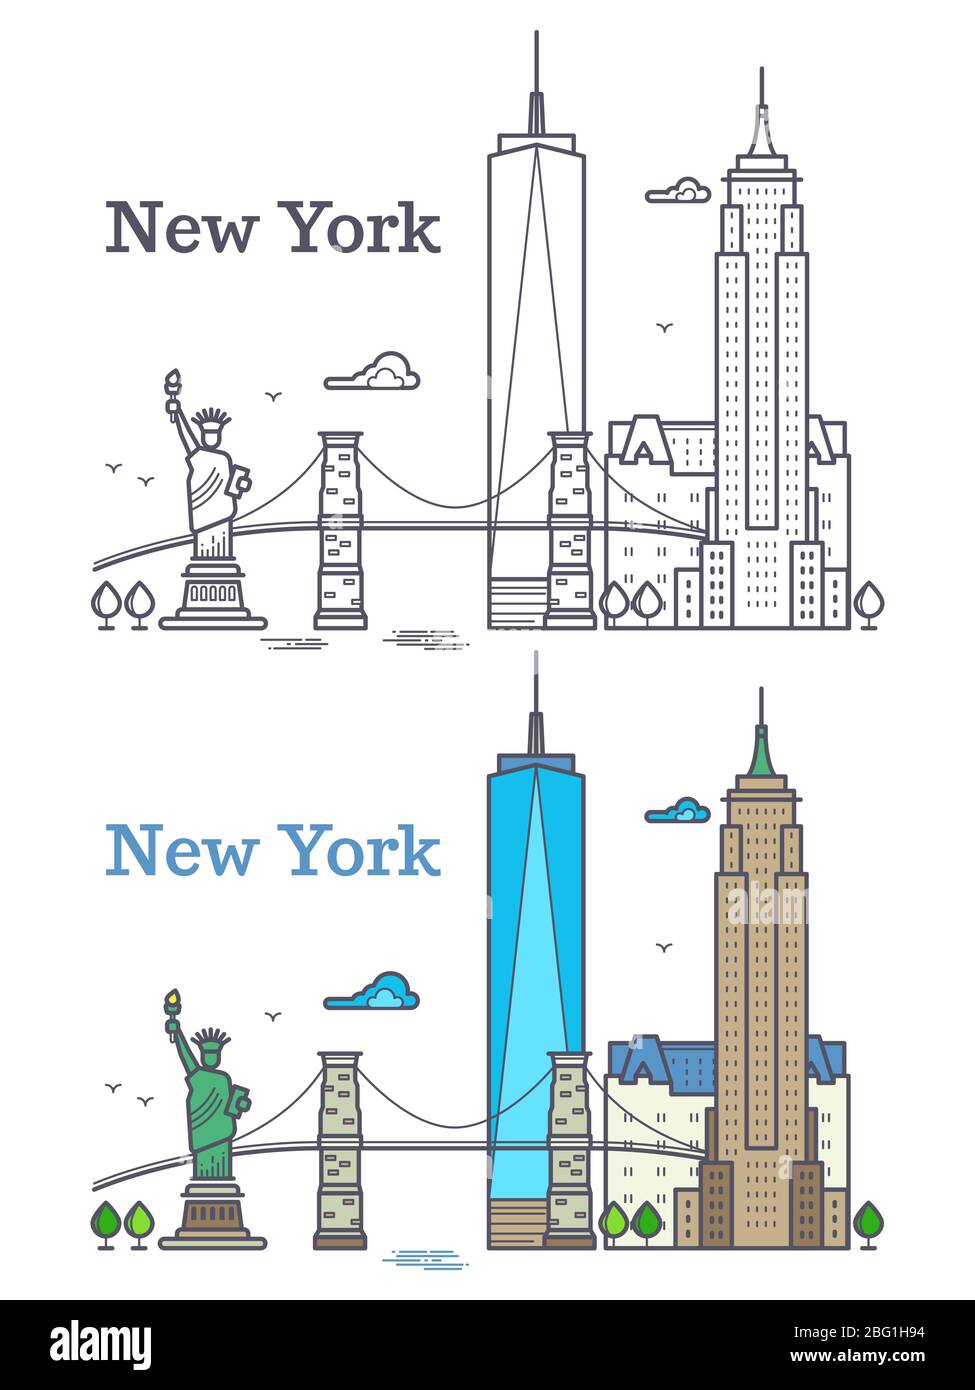 New York city outline skyline, nyc line silhouette, usa tourist and travel concept. Nyc building architecture illustration Stock Vector